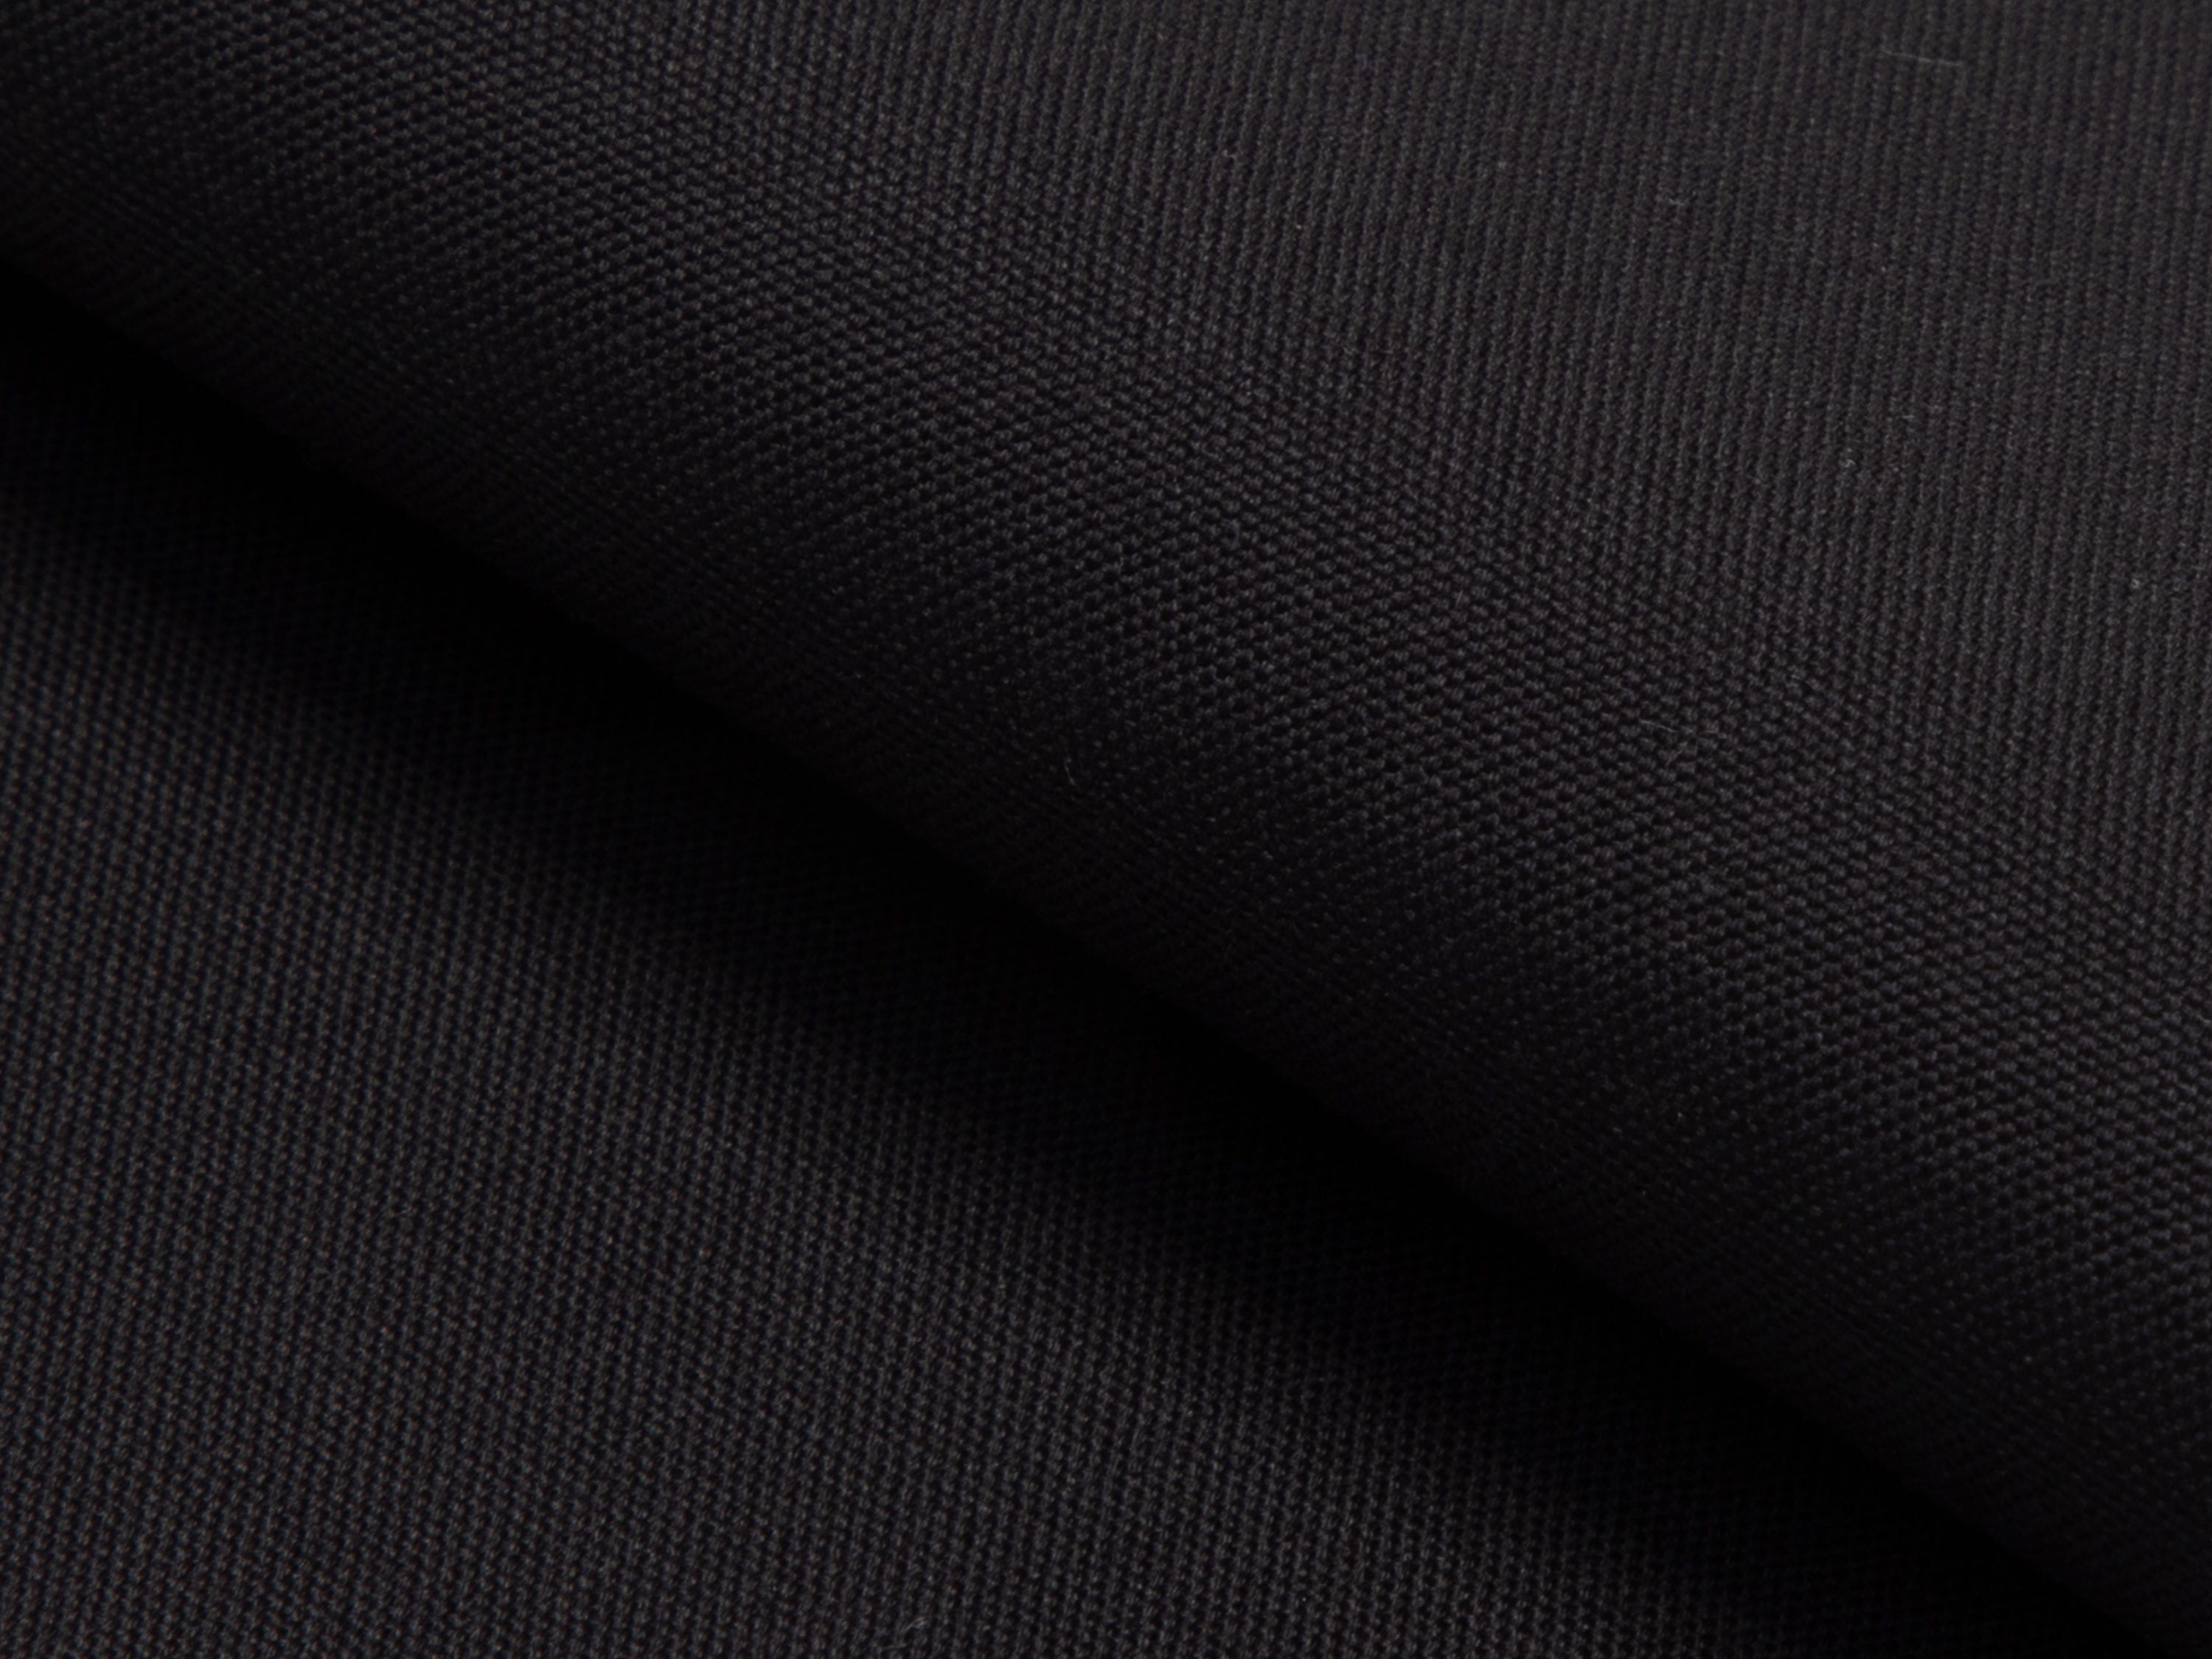 Buy tailor made shirts online - PINPOINT LUXURY - Pinpoint Black